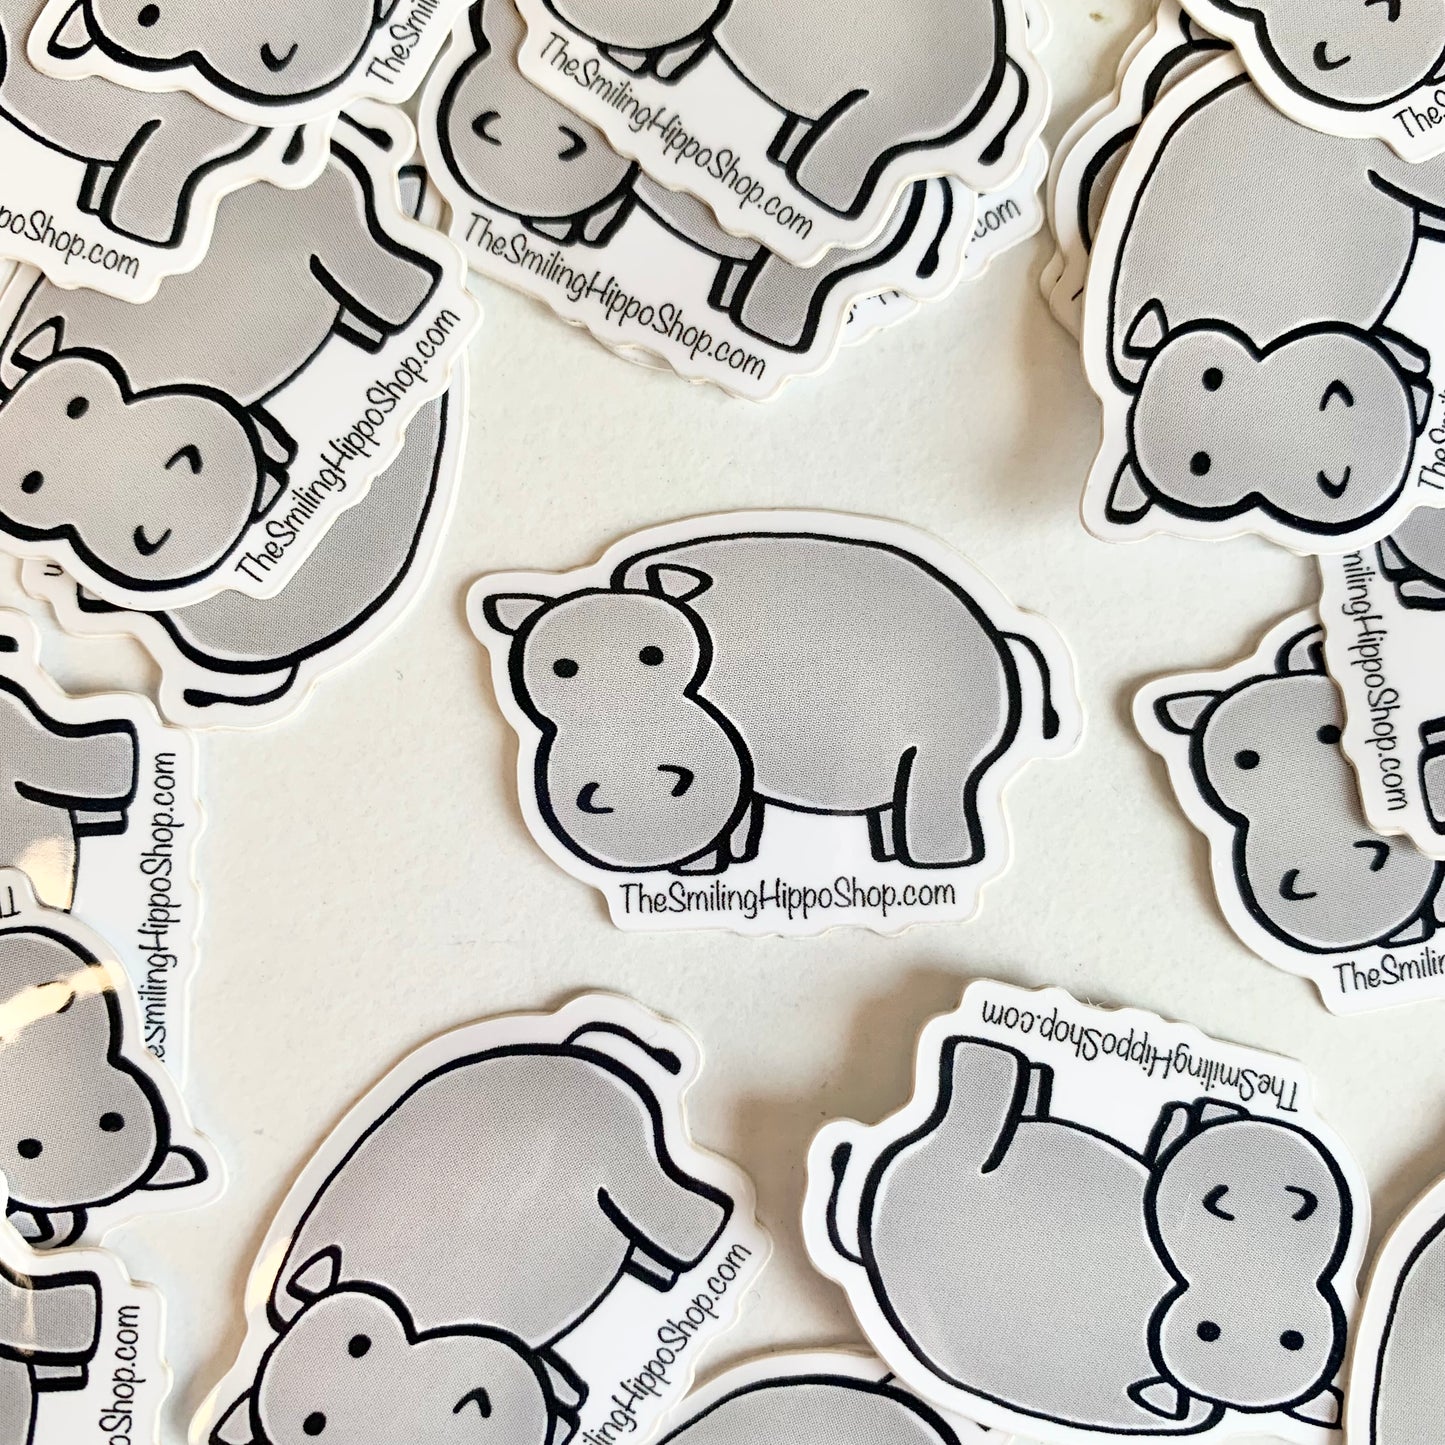 The Smiling Hippo 1x1.5in sticker